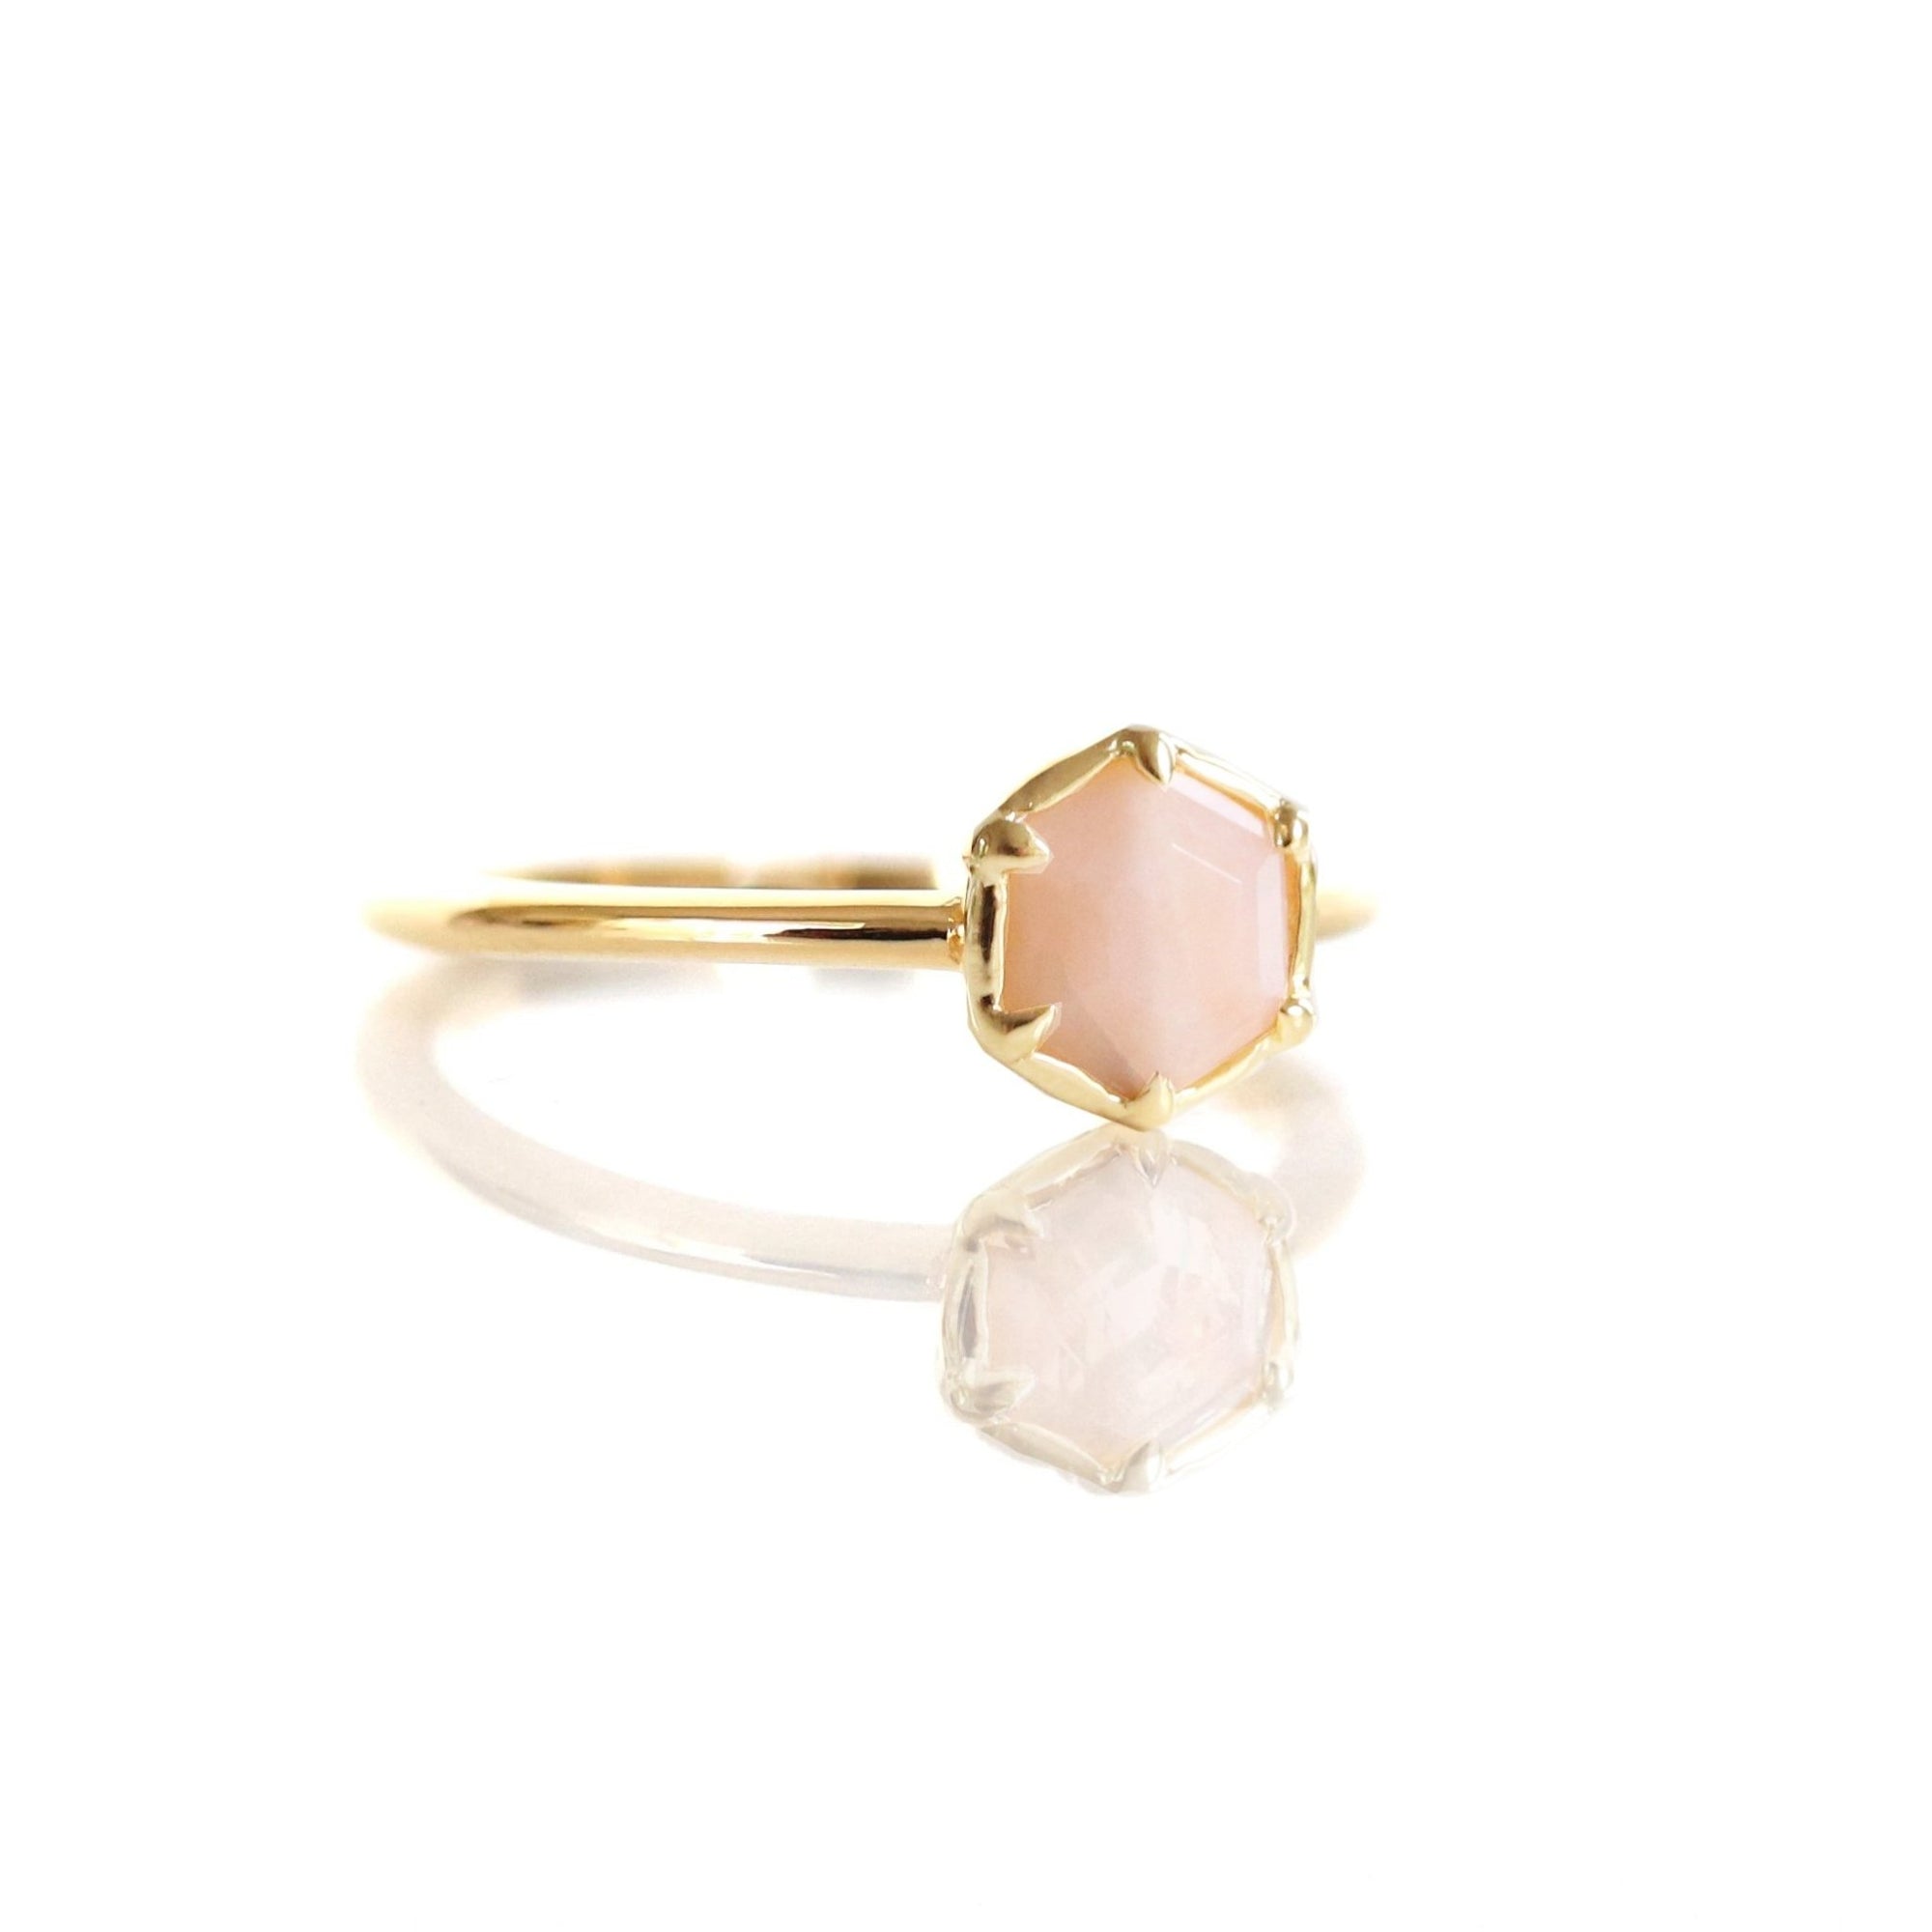 GRACE RING - PINK OPAL & GOLD - SO PRETTY CARA COTTER